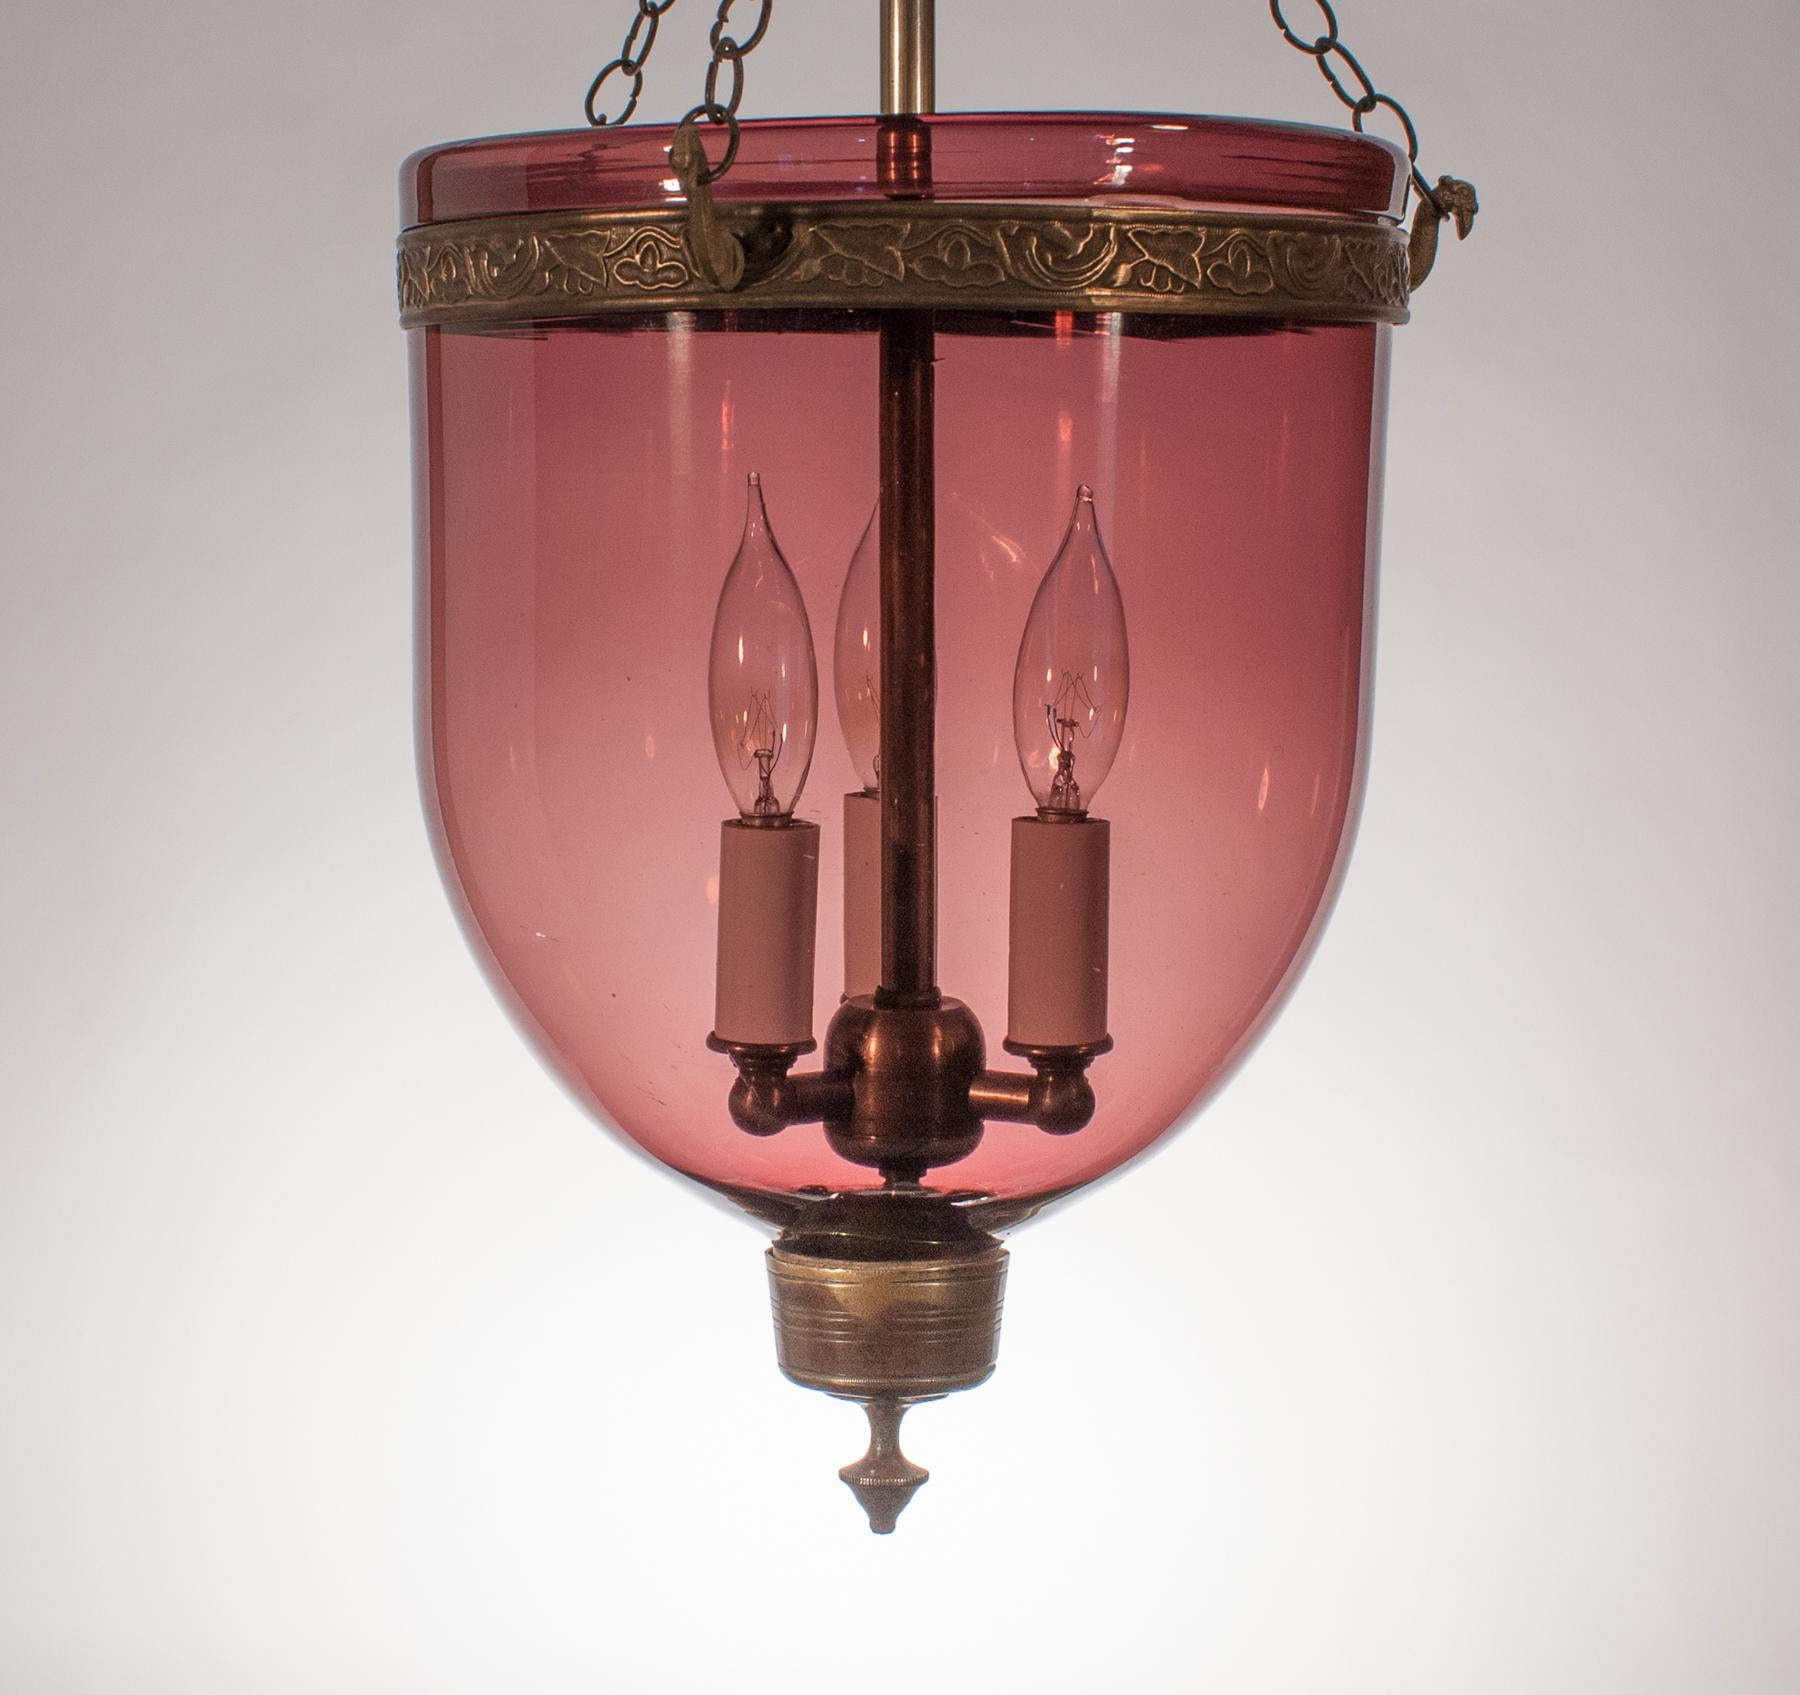 English 19th Century Bell Jar Lantern with Amethyst Colored Glass